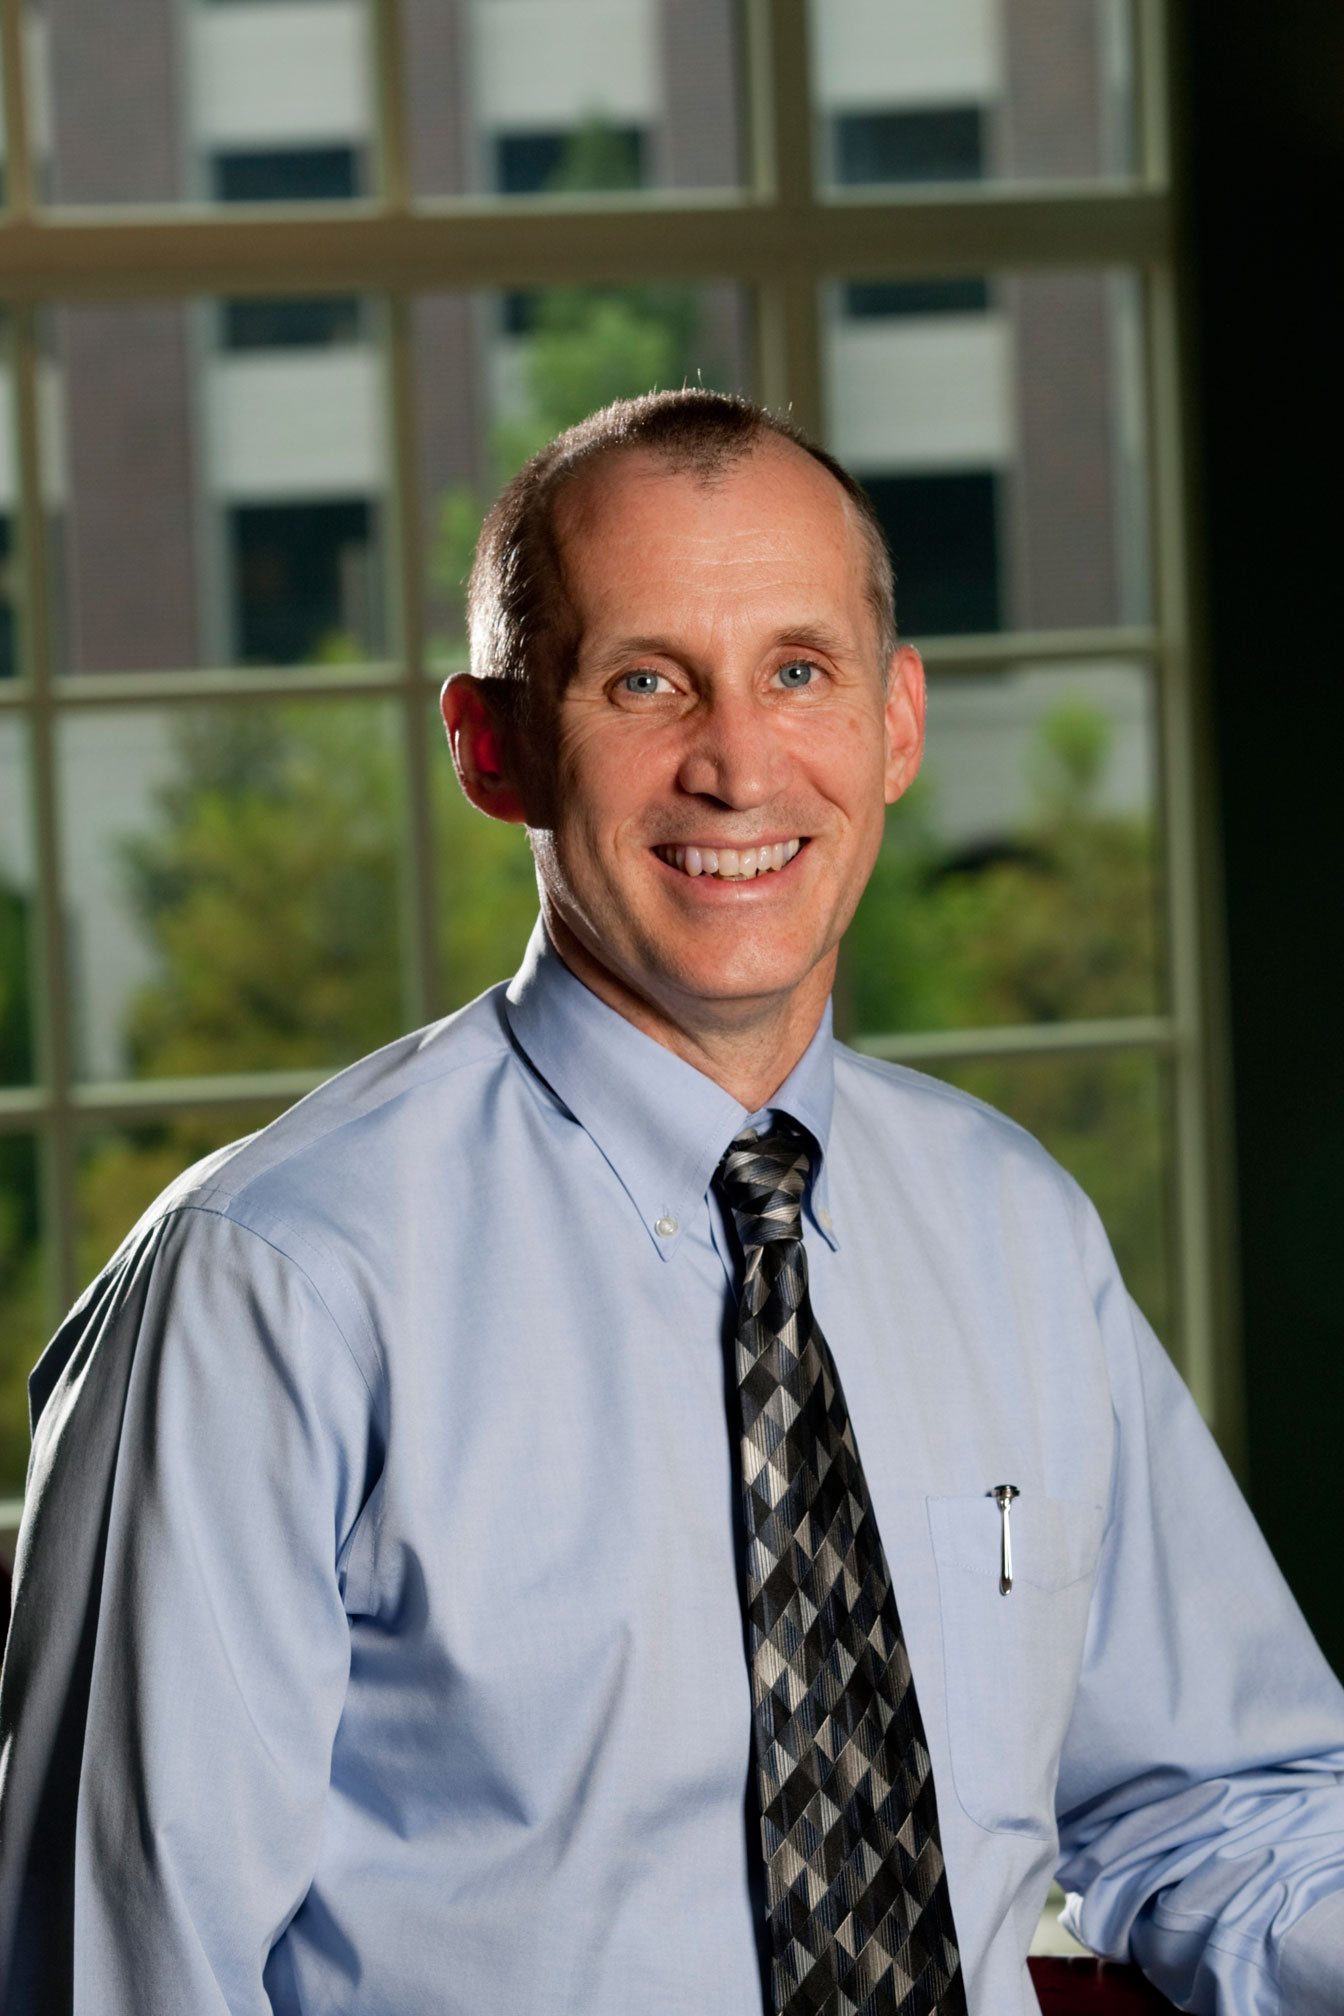 UGA’s Dr. Christopher Whalen honored with Beckman Award for teaching excellence